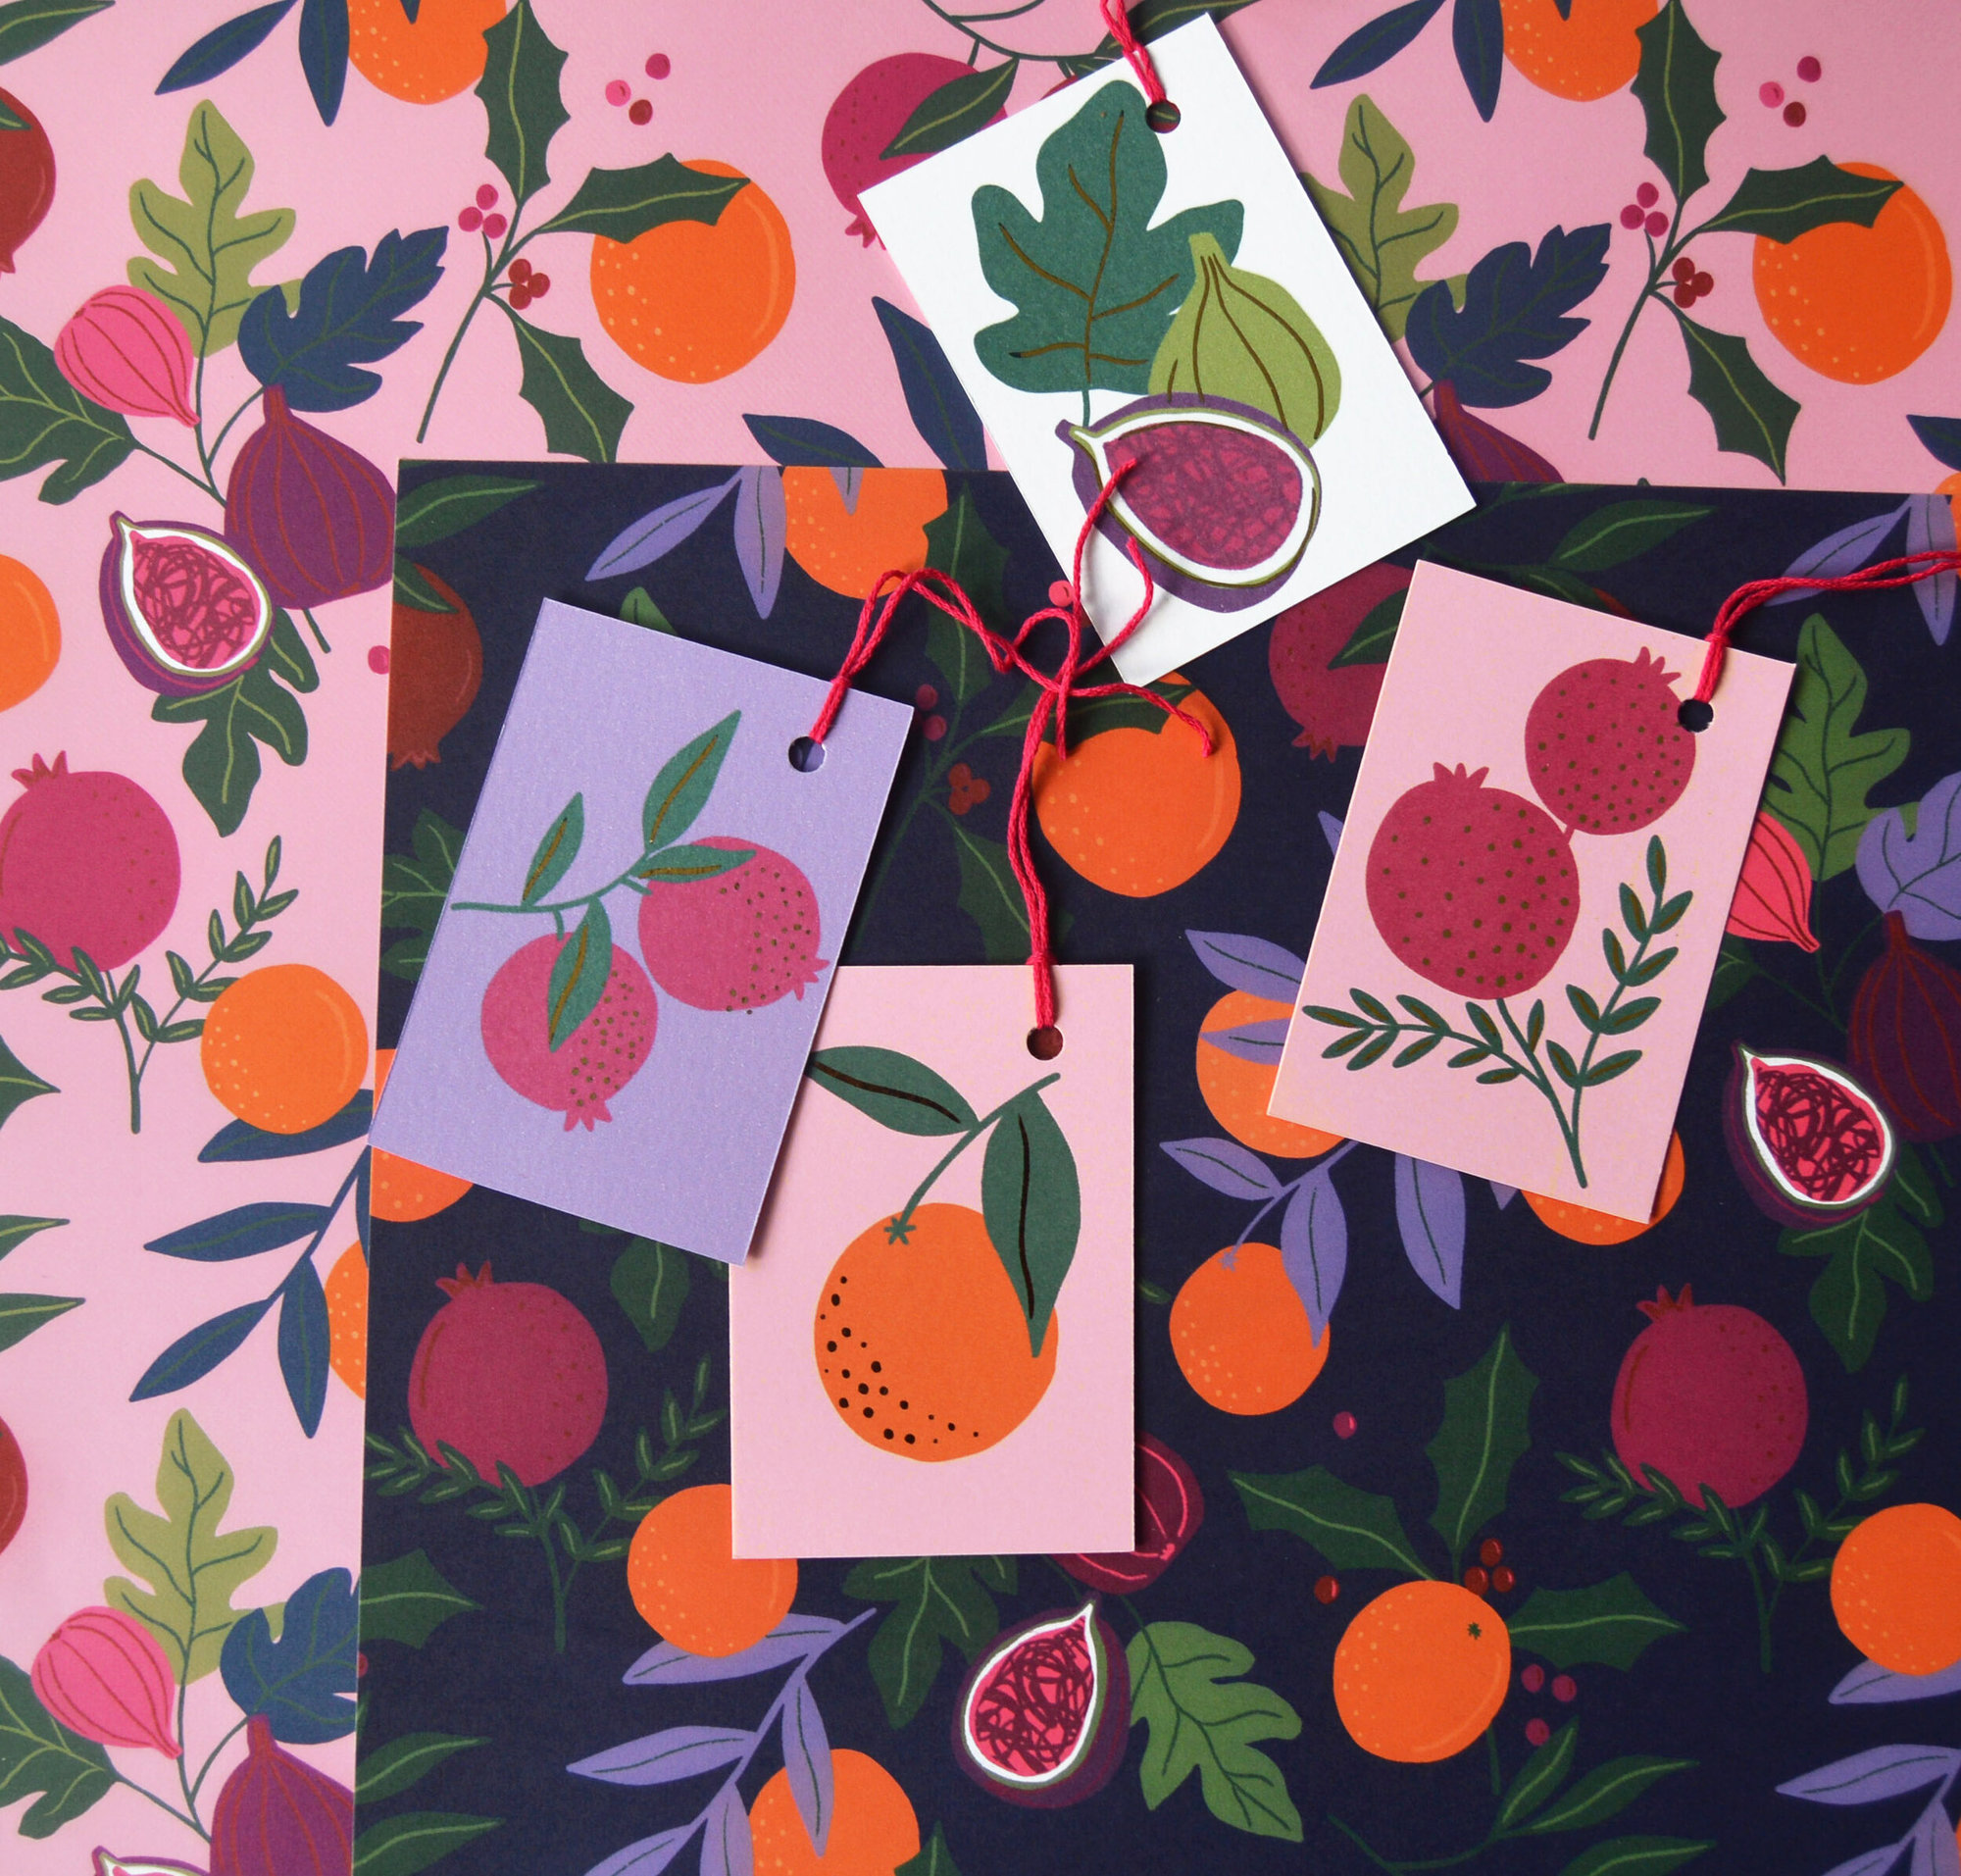 Botanical Fruits Wrapping Paper - Navy, 2 sheets & 2 tags